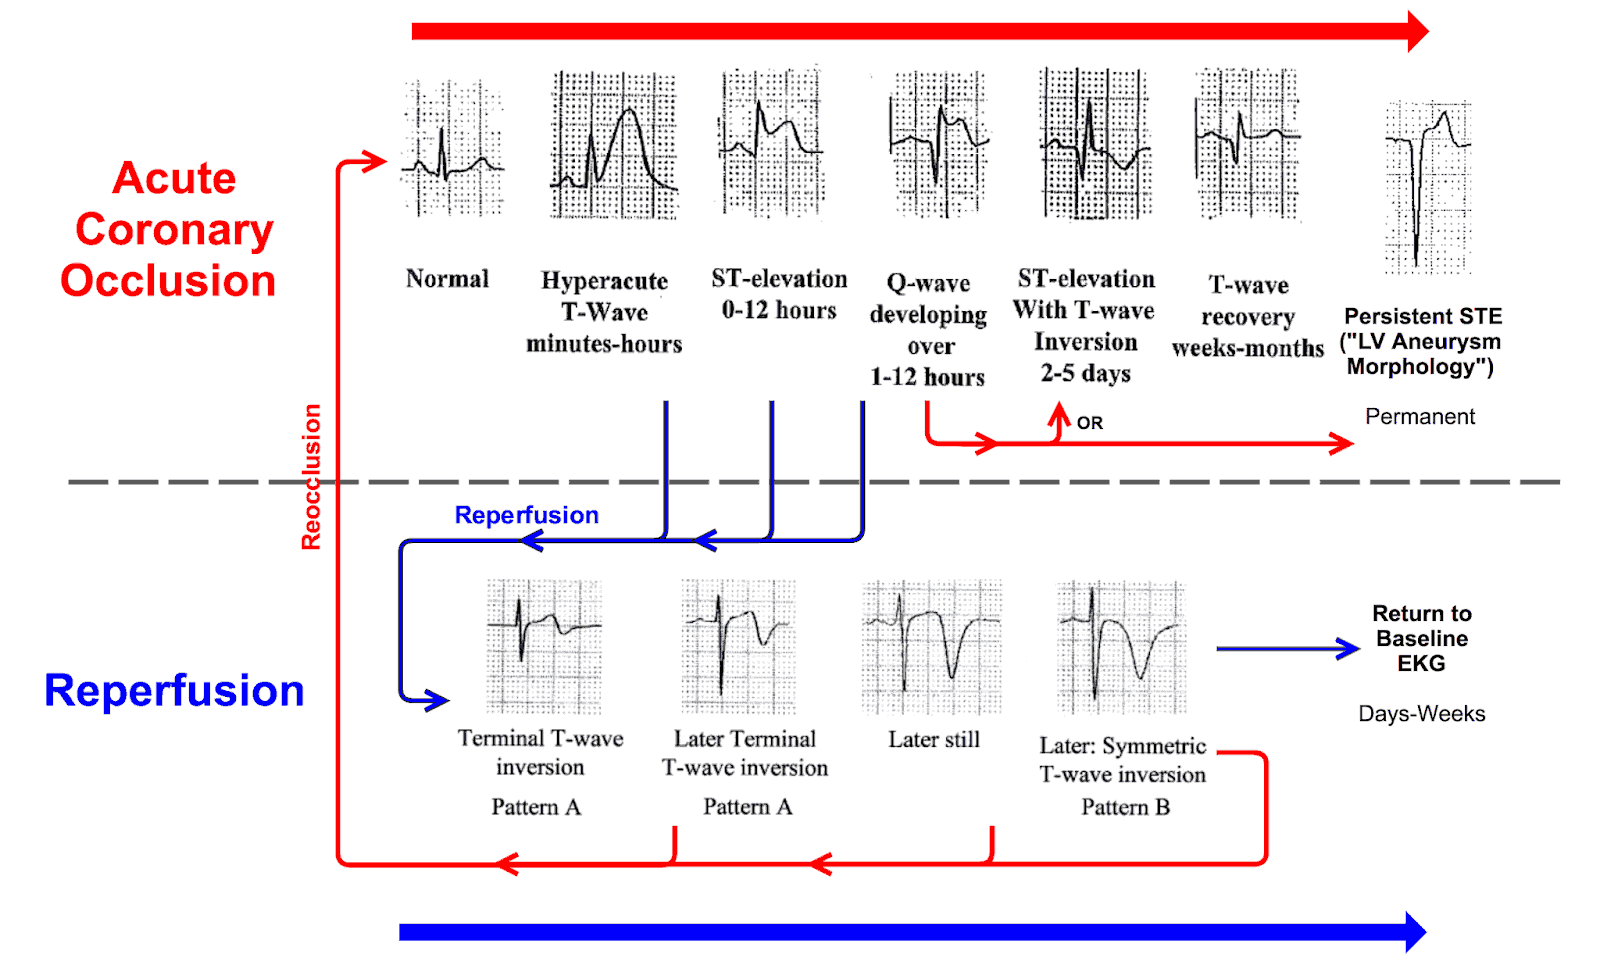 The progression of ECG findings seen during acute coronary occlusion and reperfusion